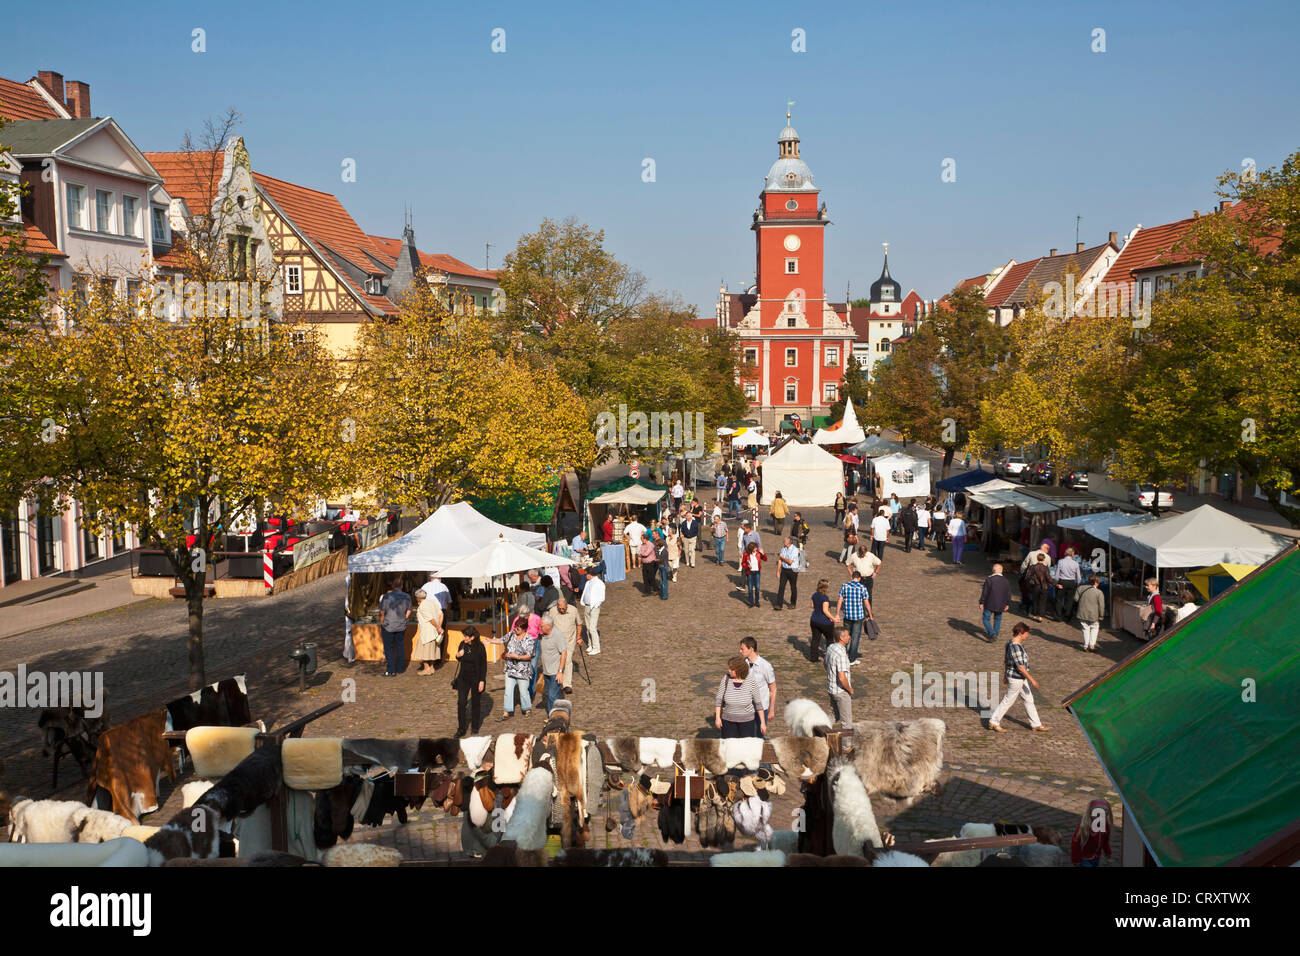 Germany, Thuringia, Gotha, People at arts and crafts market Stock Photo